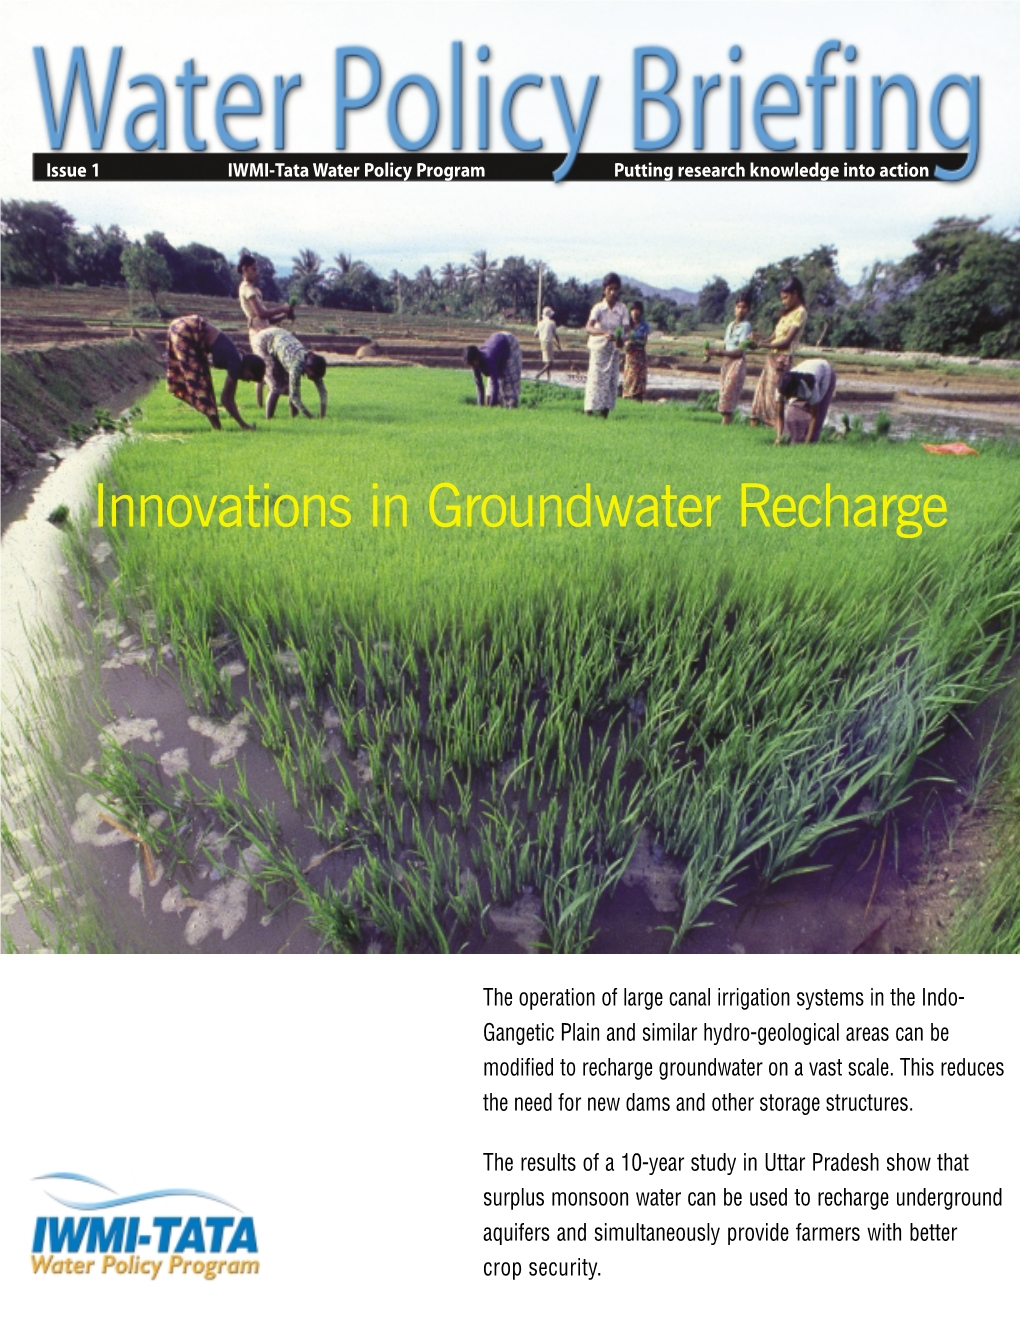 Innovations in Groundwater Recharge